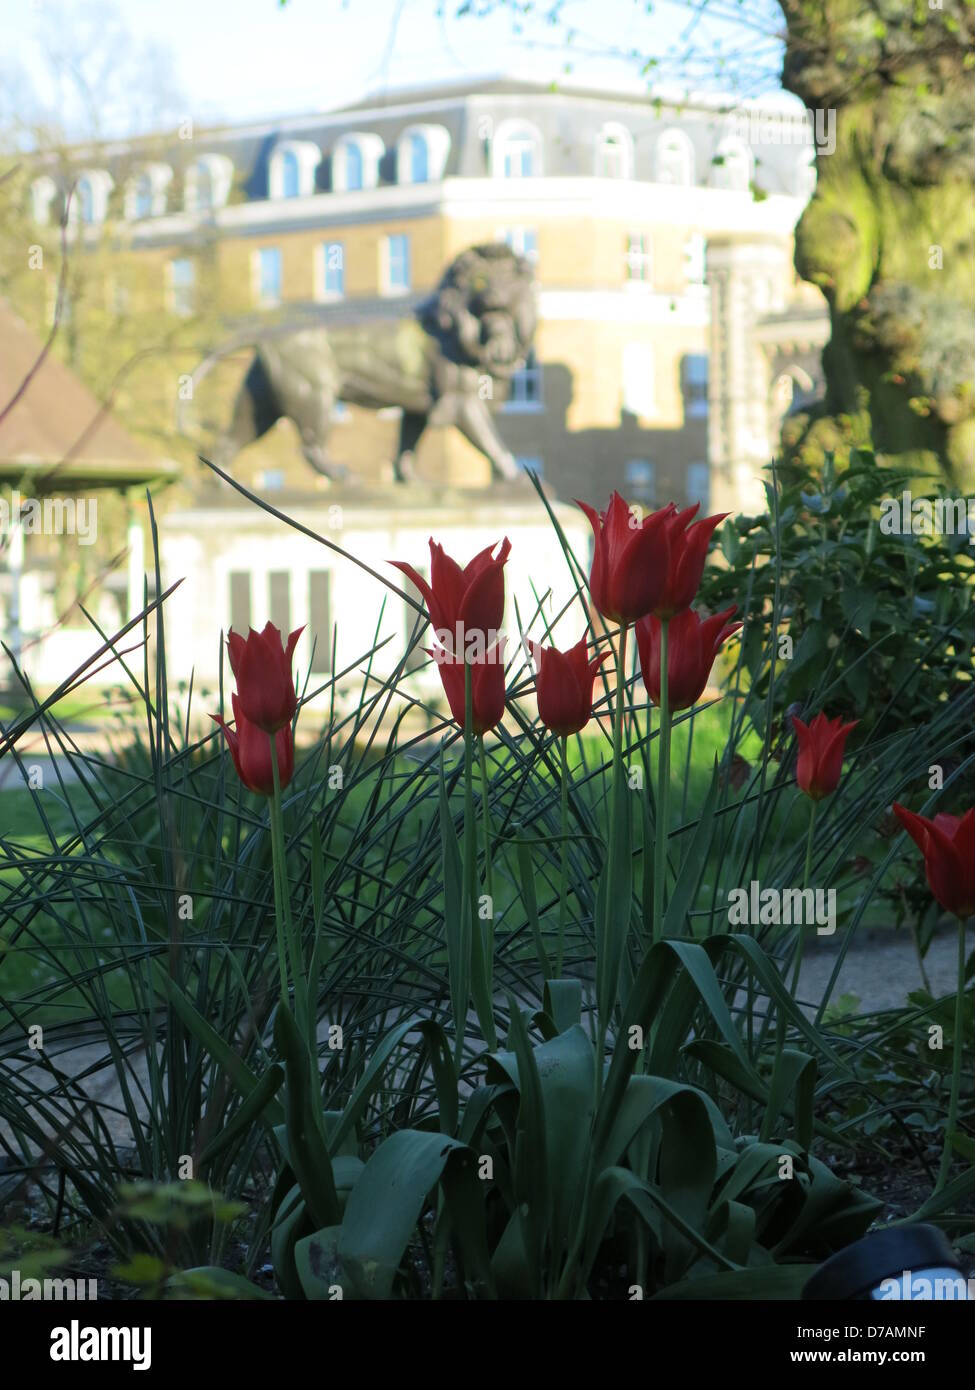 Reading, Berkshire, UK. 2nd May 2013. Tulips in bloom in front of the Maiwand Lion in Forbury Gardens Reading, Berkshire, UK 020513.JPG Credit:  Sarah Tubb / Alamy Live News Stock Photo